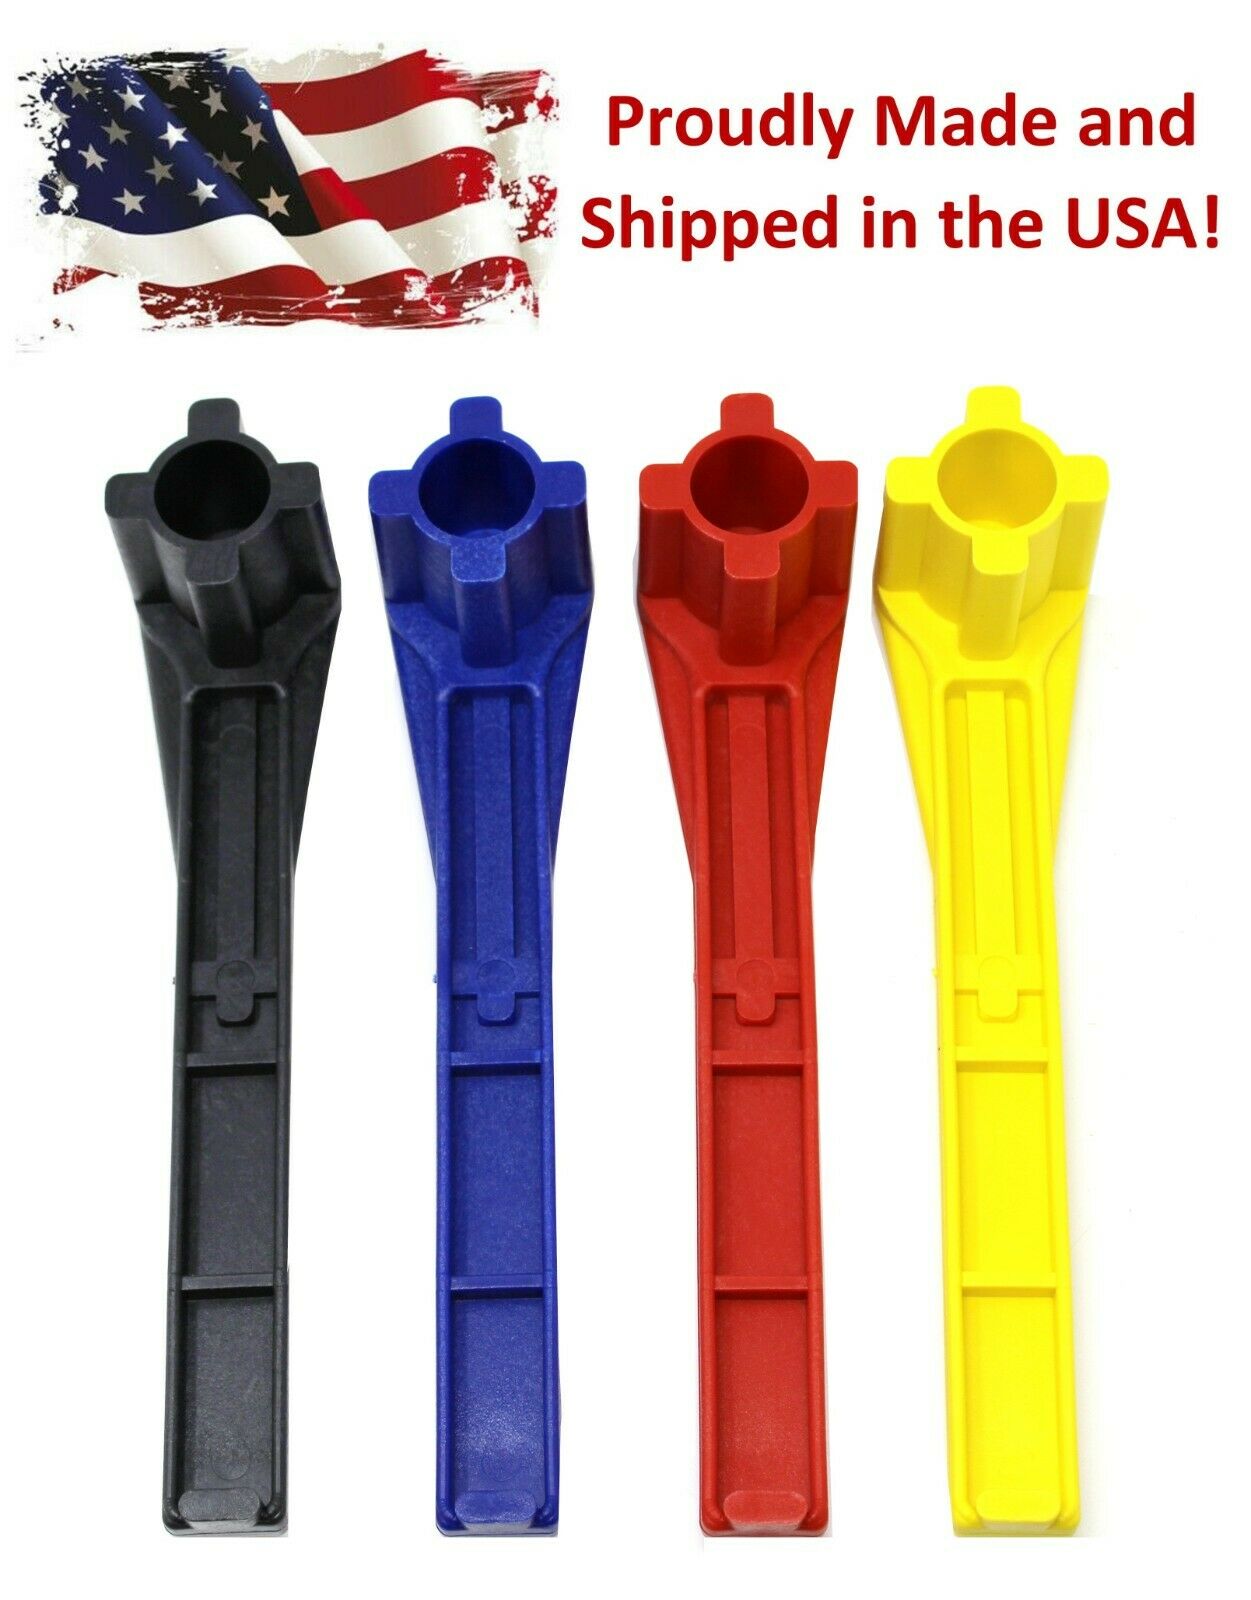 4-in-1 Bung Drum Wrench 55-30-15 Gallon Water Barrel Nut Cap Plug Pick A Color